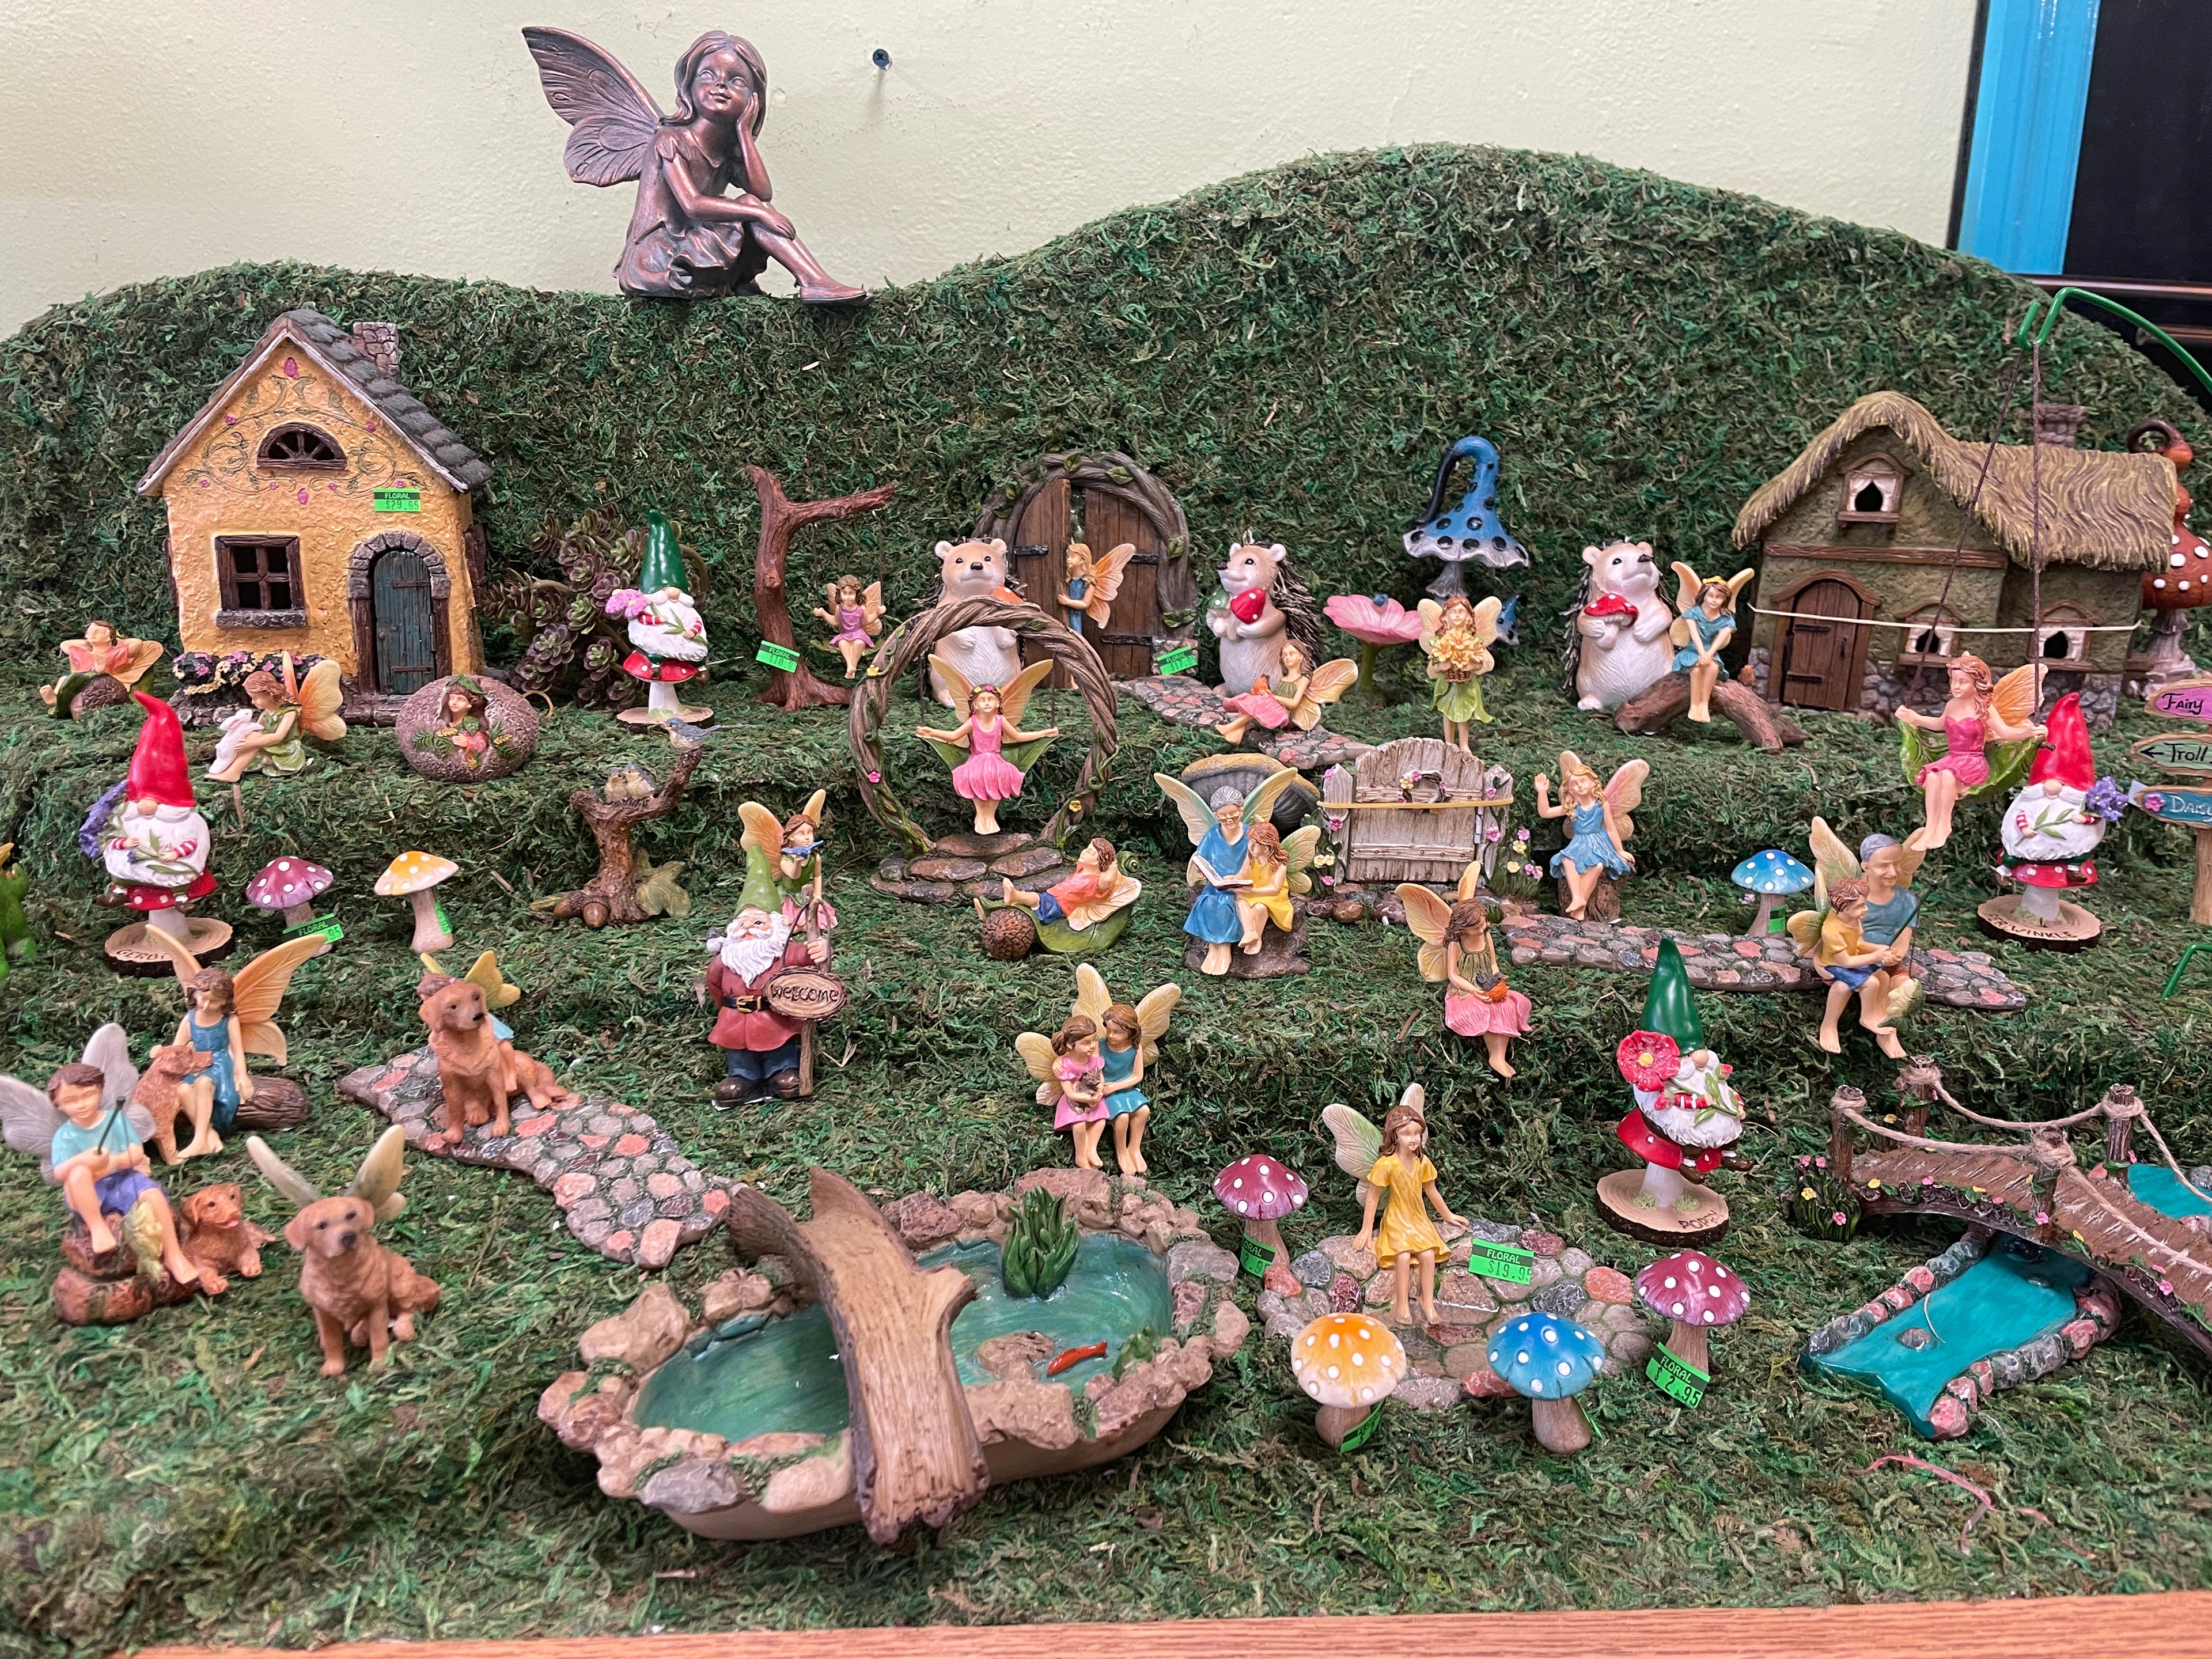 Discover a magical scene in our miniature fairy garden, brought to life with enchanting resin figurines. Each carefully placed piece adds a touch of whimsy and sophistication, creating a unique and colorful oasis for your gardening and landscaping pursuits.